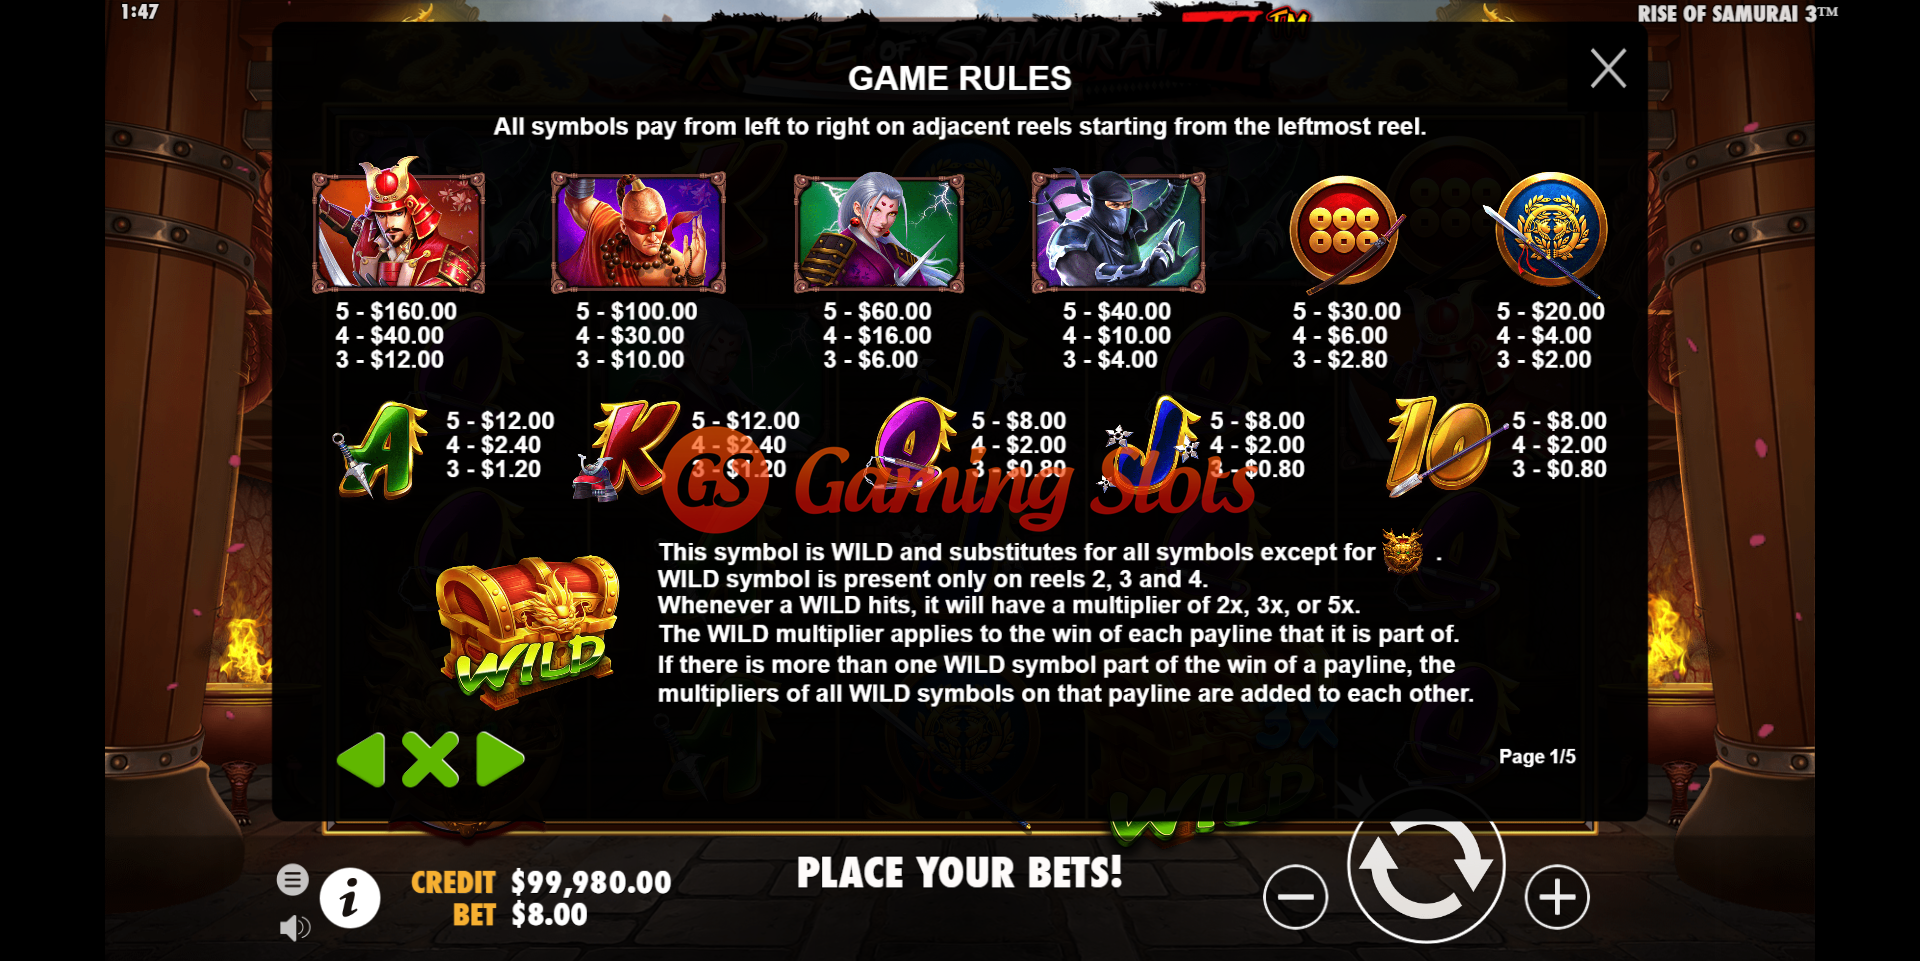 Game Rules for Rise of Samurai 3 slot from Pragmatic Play